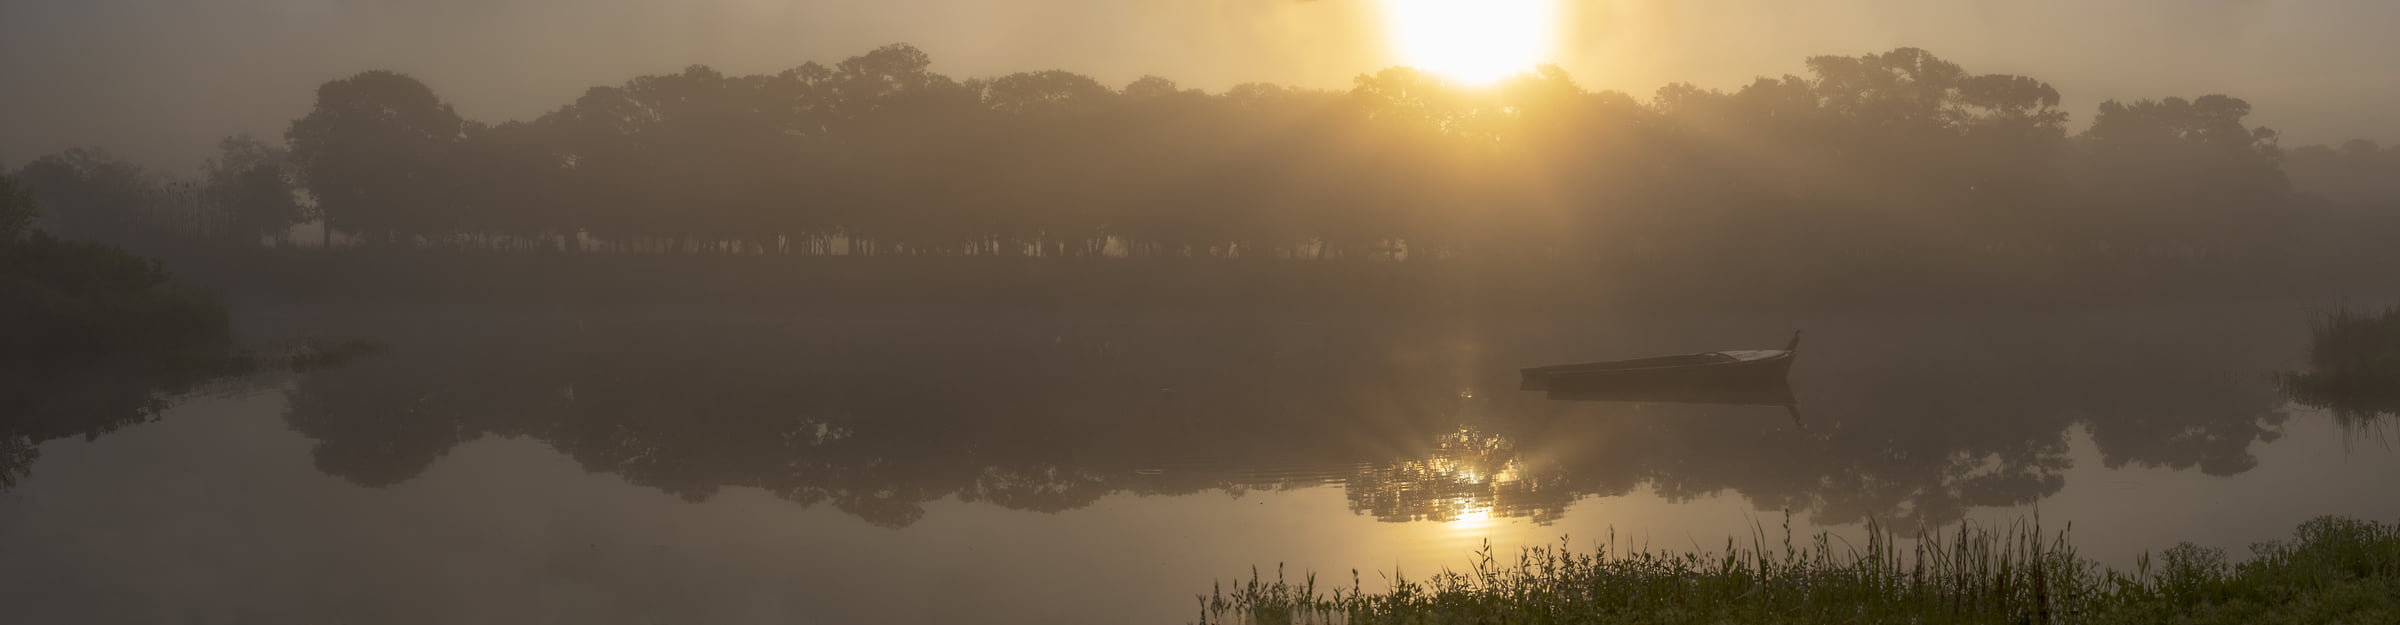 679 megapixels! A very high resolution, large-format VAST photo print of a foggy sunrise; panorama photograph created by John Freeman in Jones Creek, TX